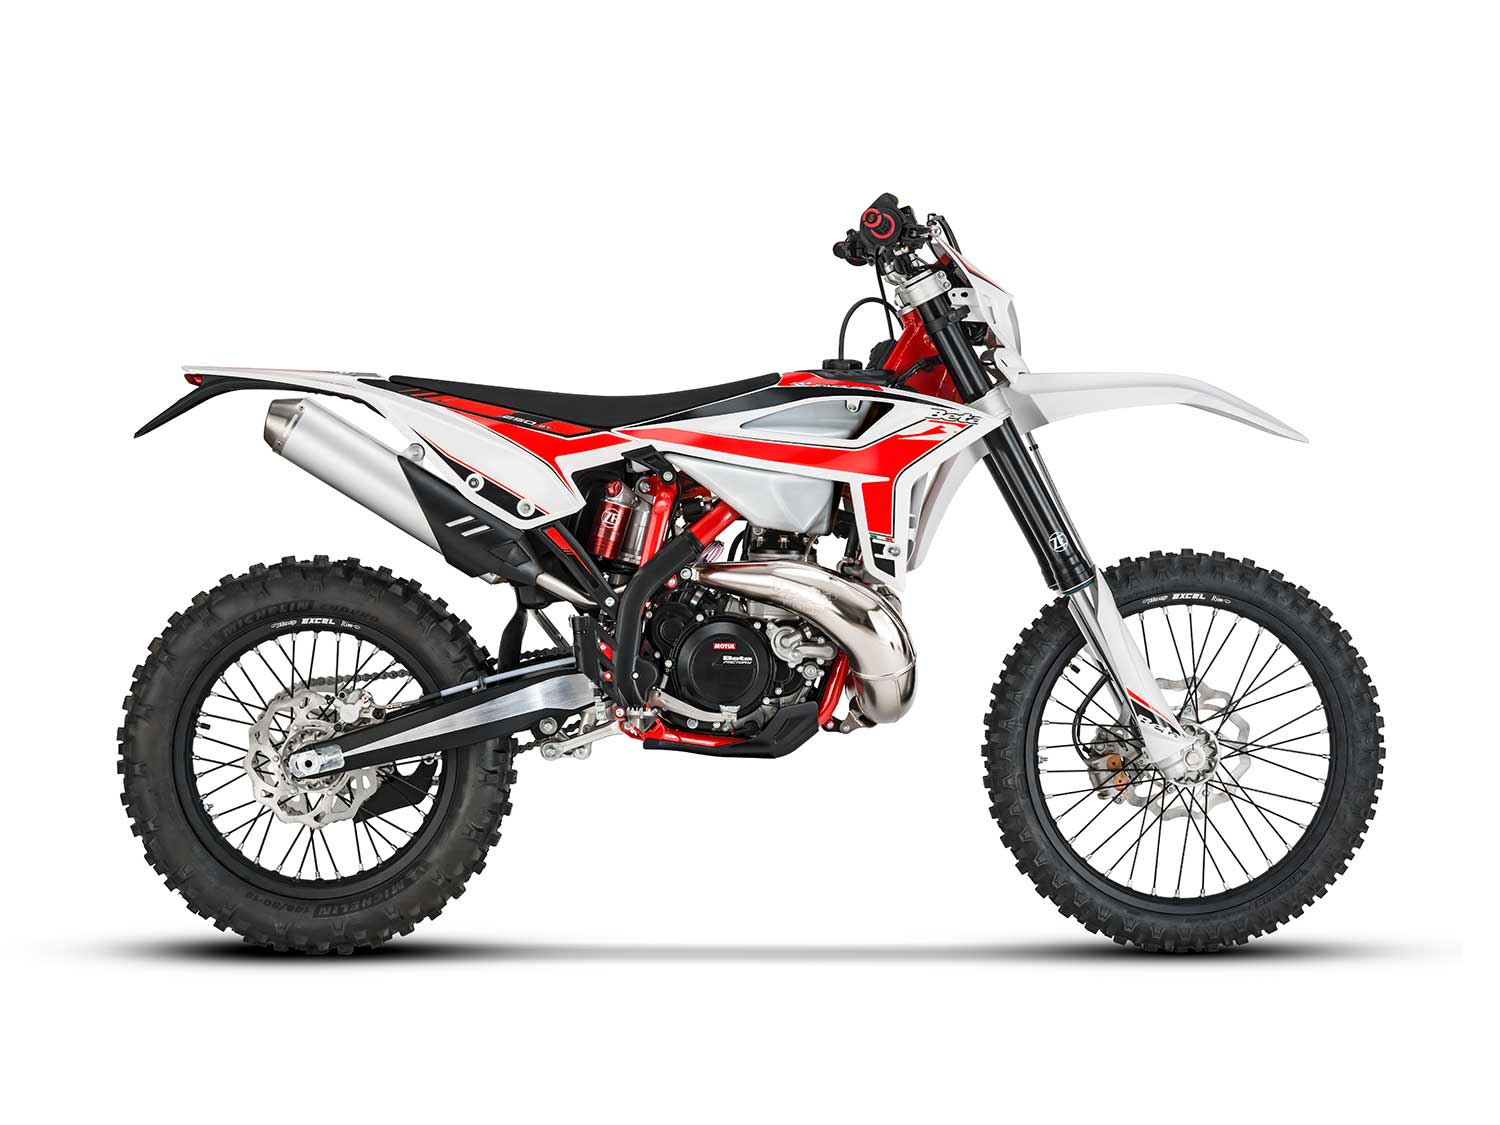 2020 250cc Off-Road Two-Stroke Dirt Bikes To Buy Cycle World